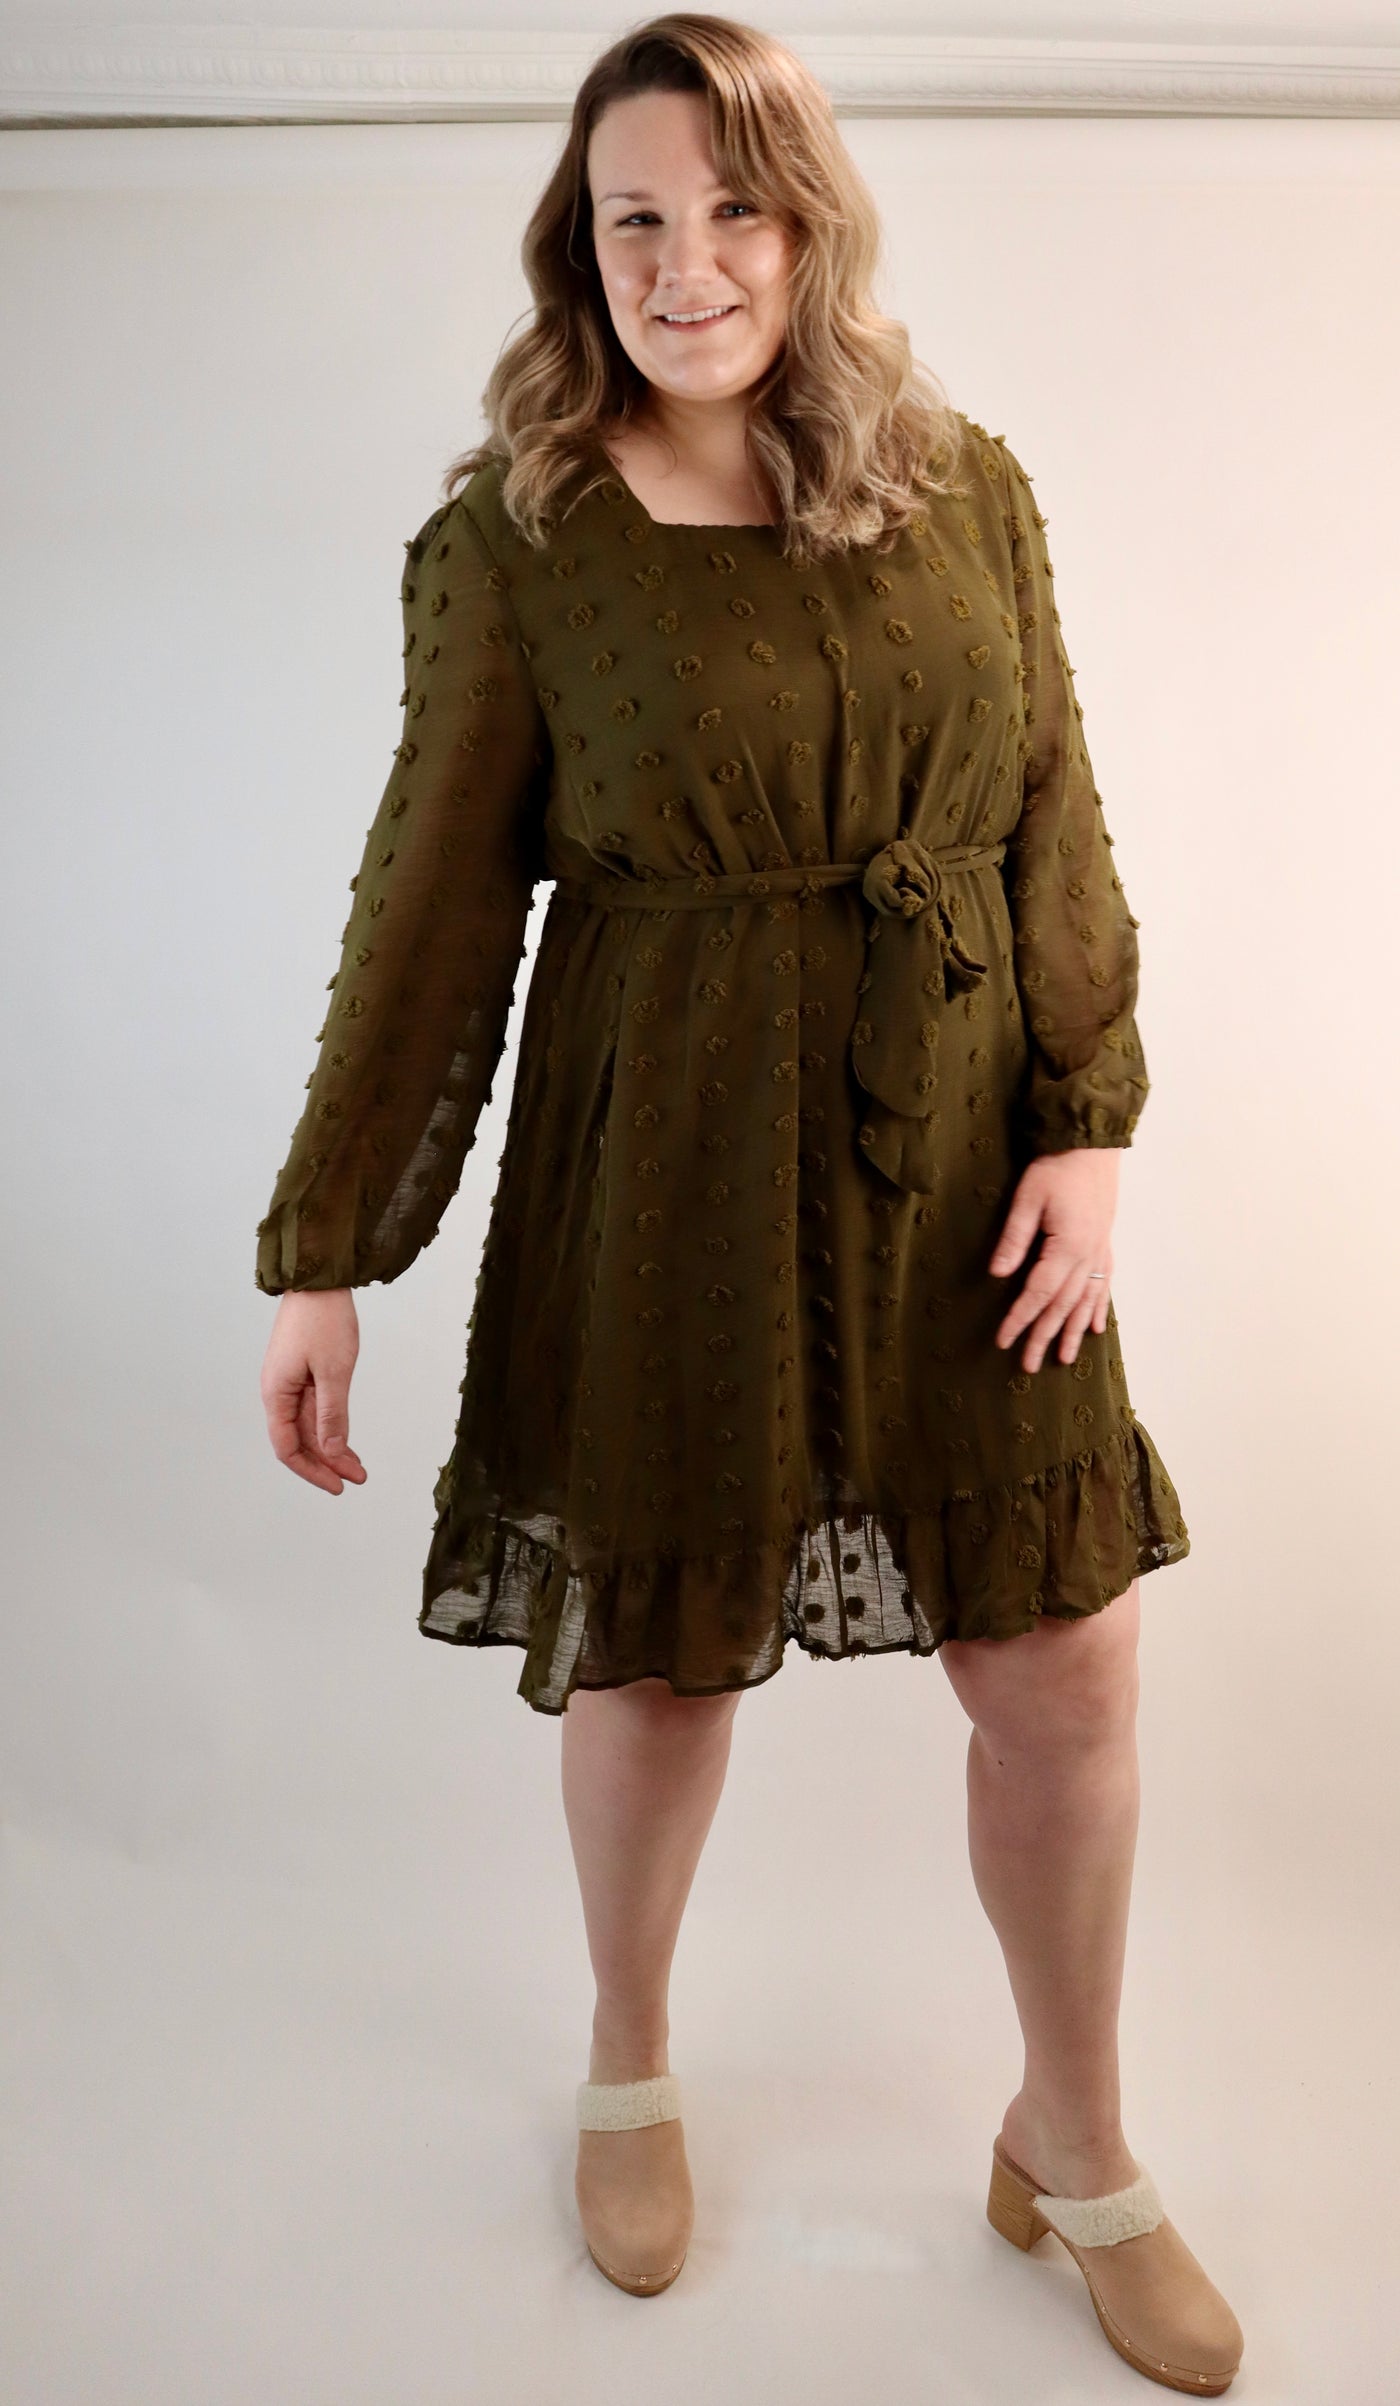 Olive green dress that hits and knee with textured polka dots all over. Square neckline with sheer sleeves that is for curvy sizes. Plus size dress with juggle bottom and tie waist.